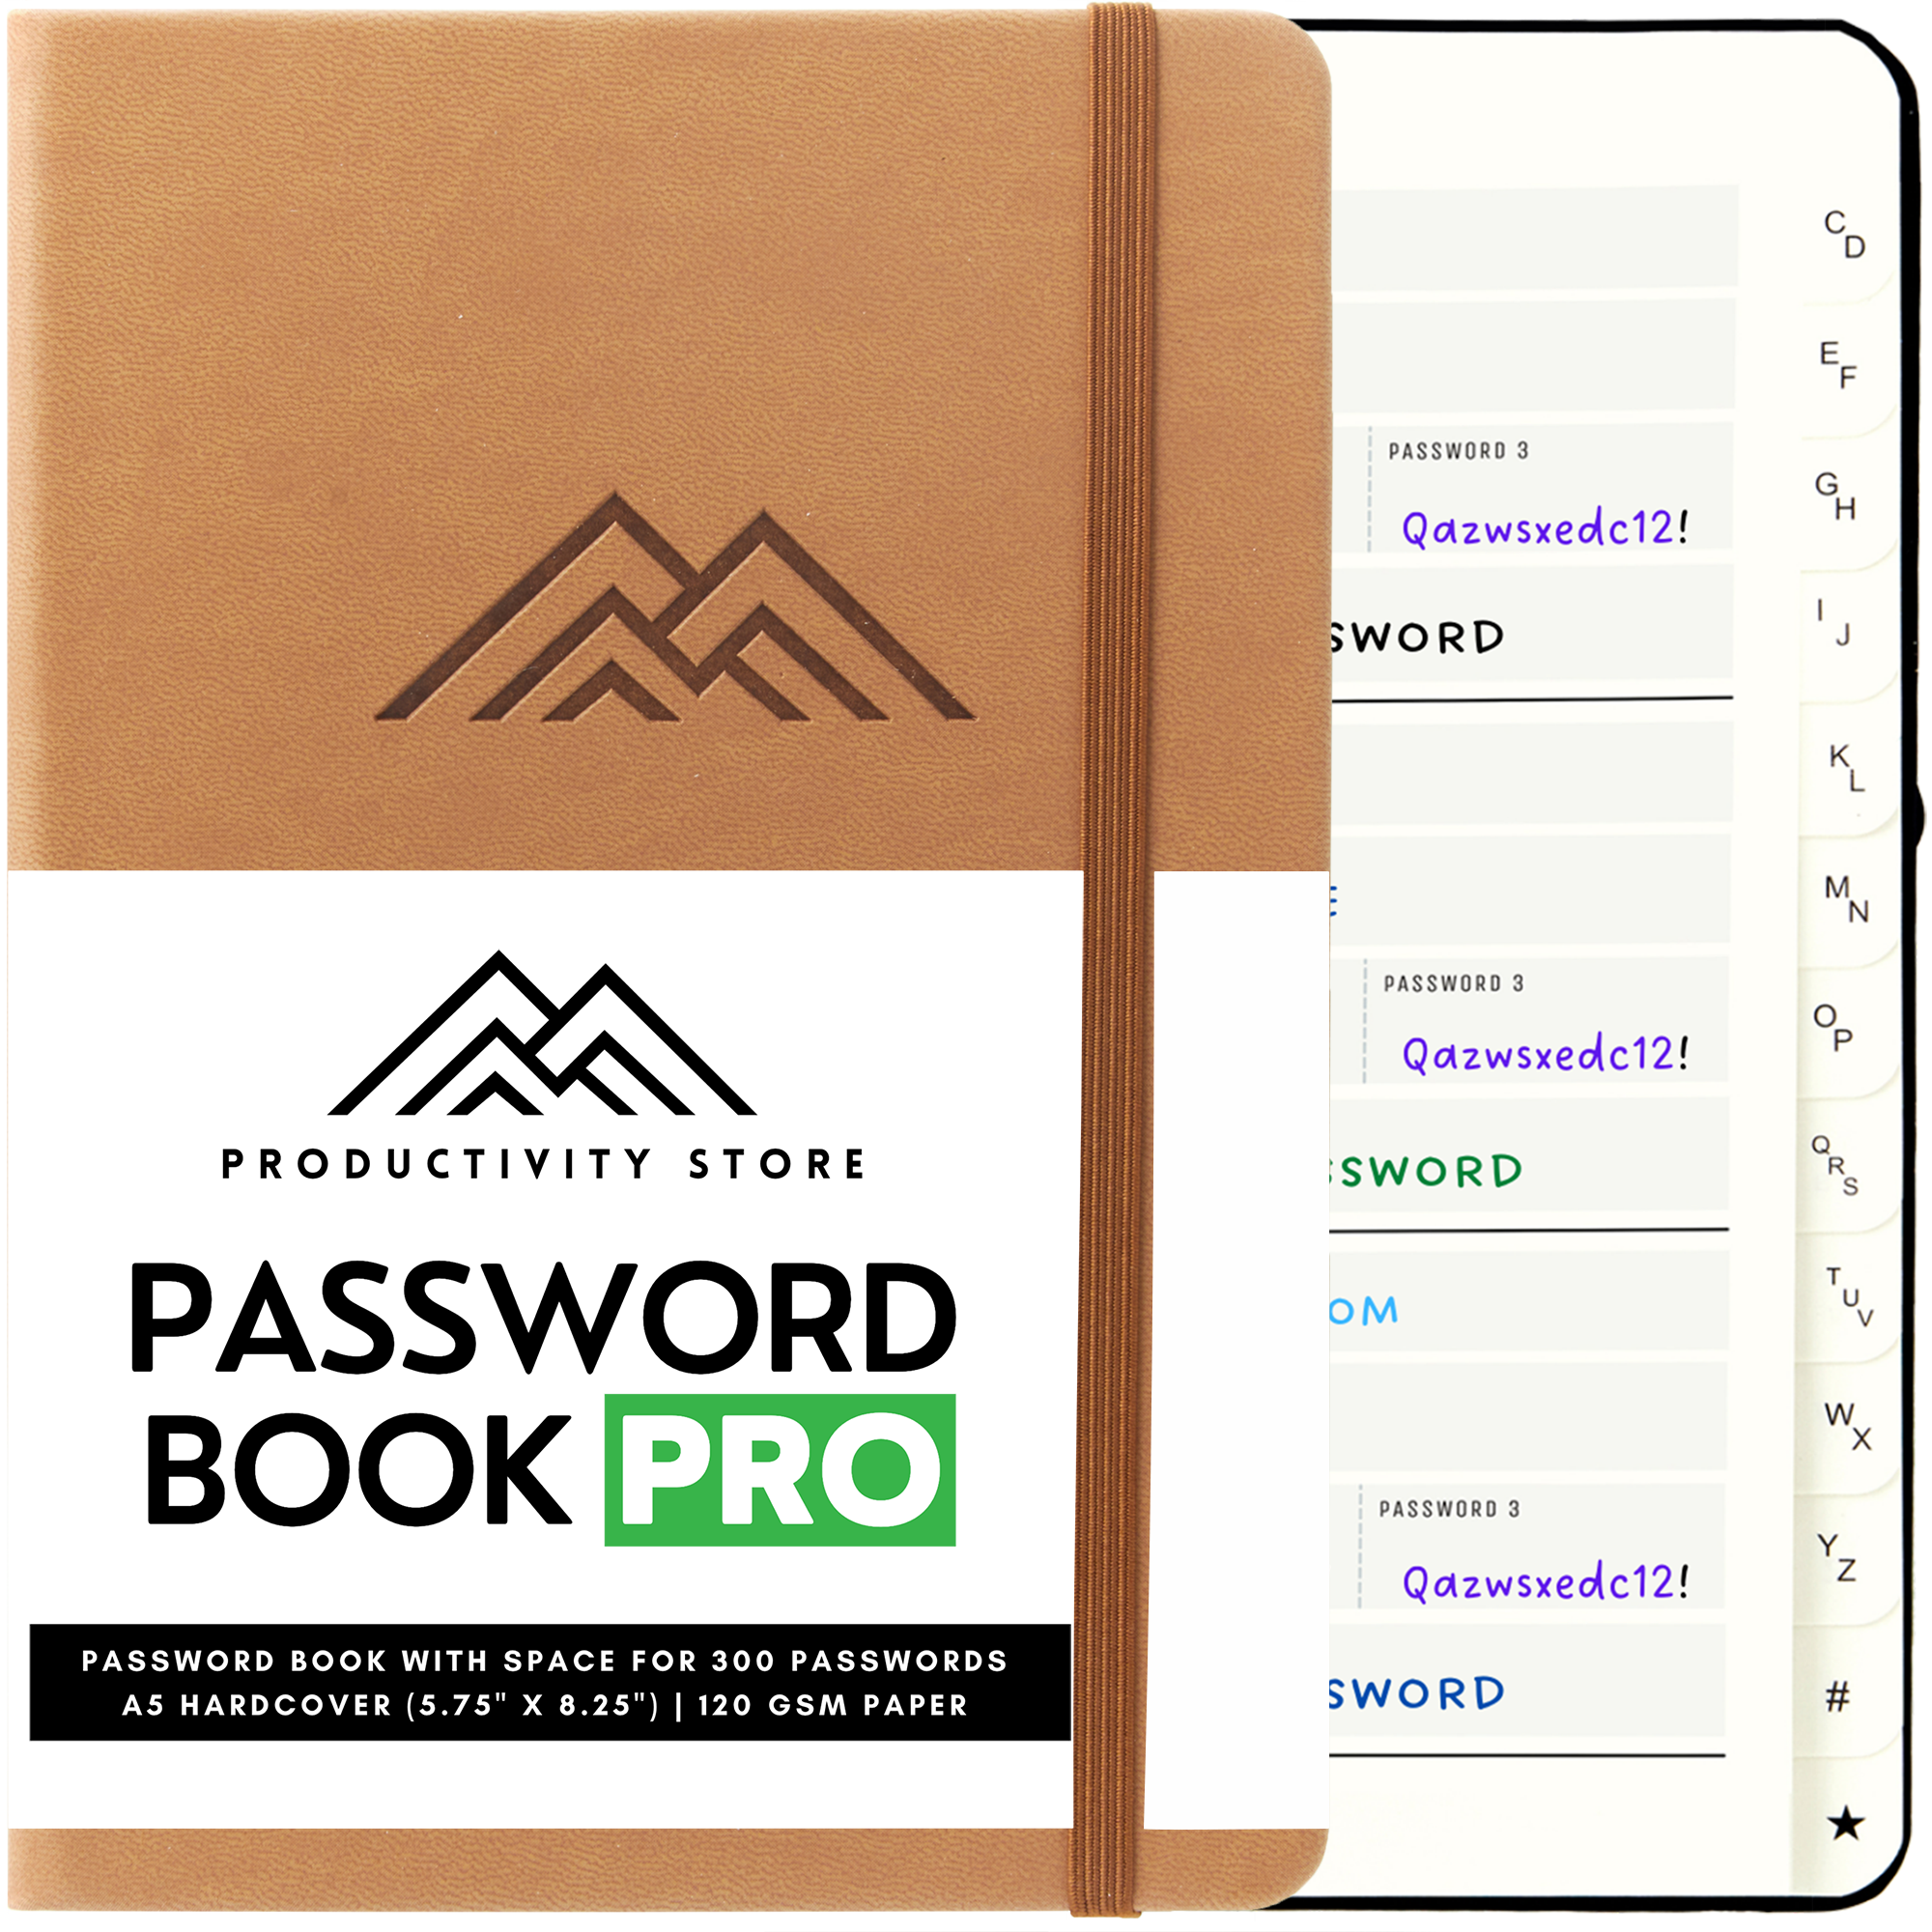 Password Book: An Essential Tool in Your Cyber Security Arsenal